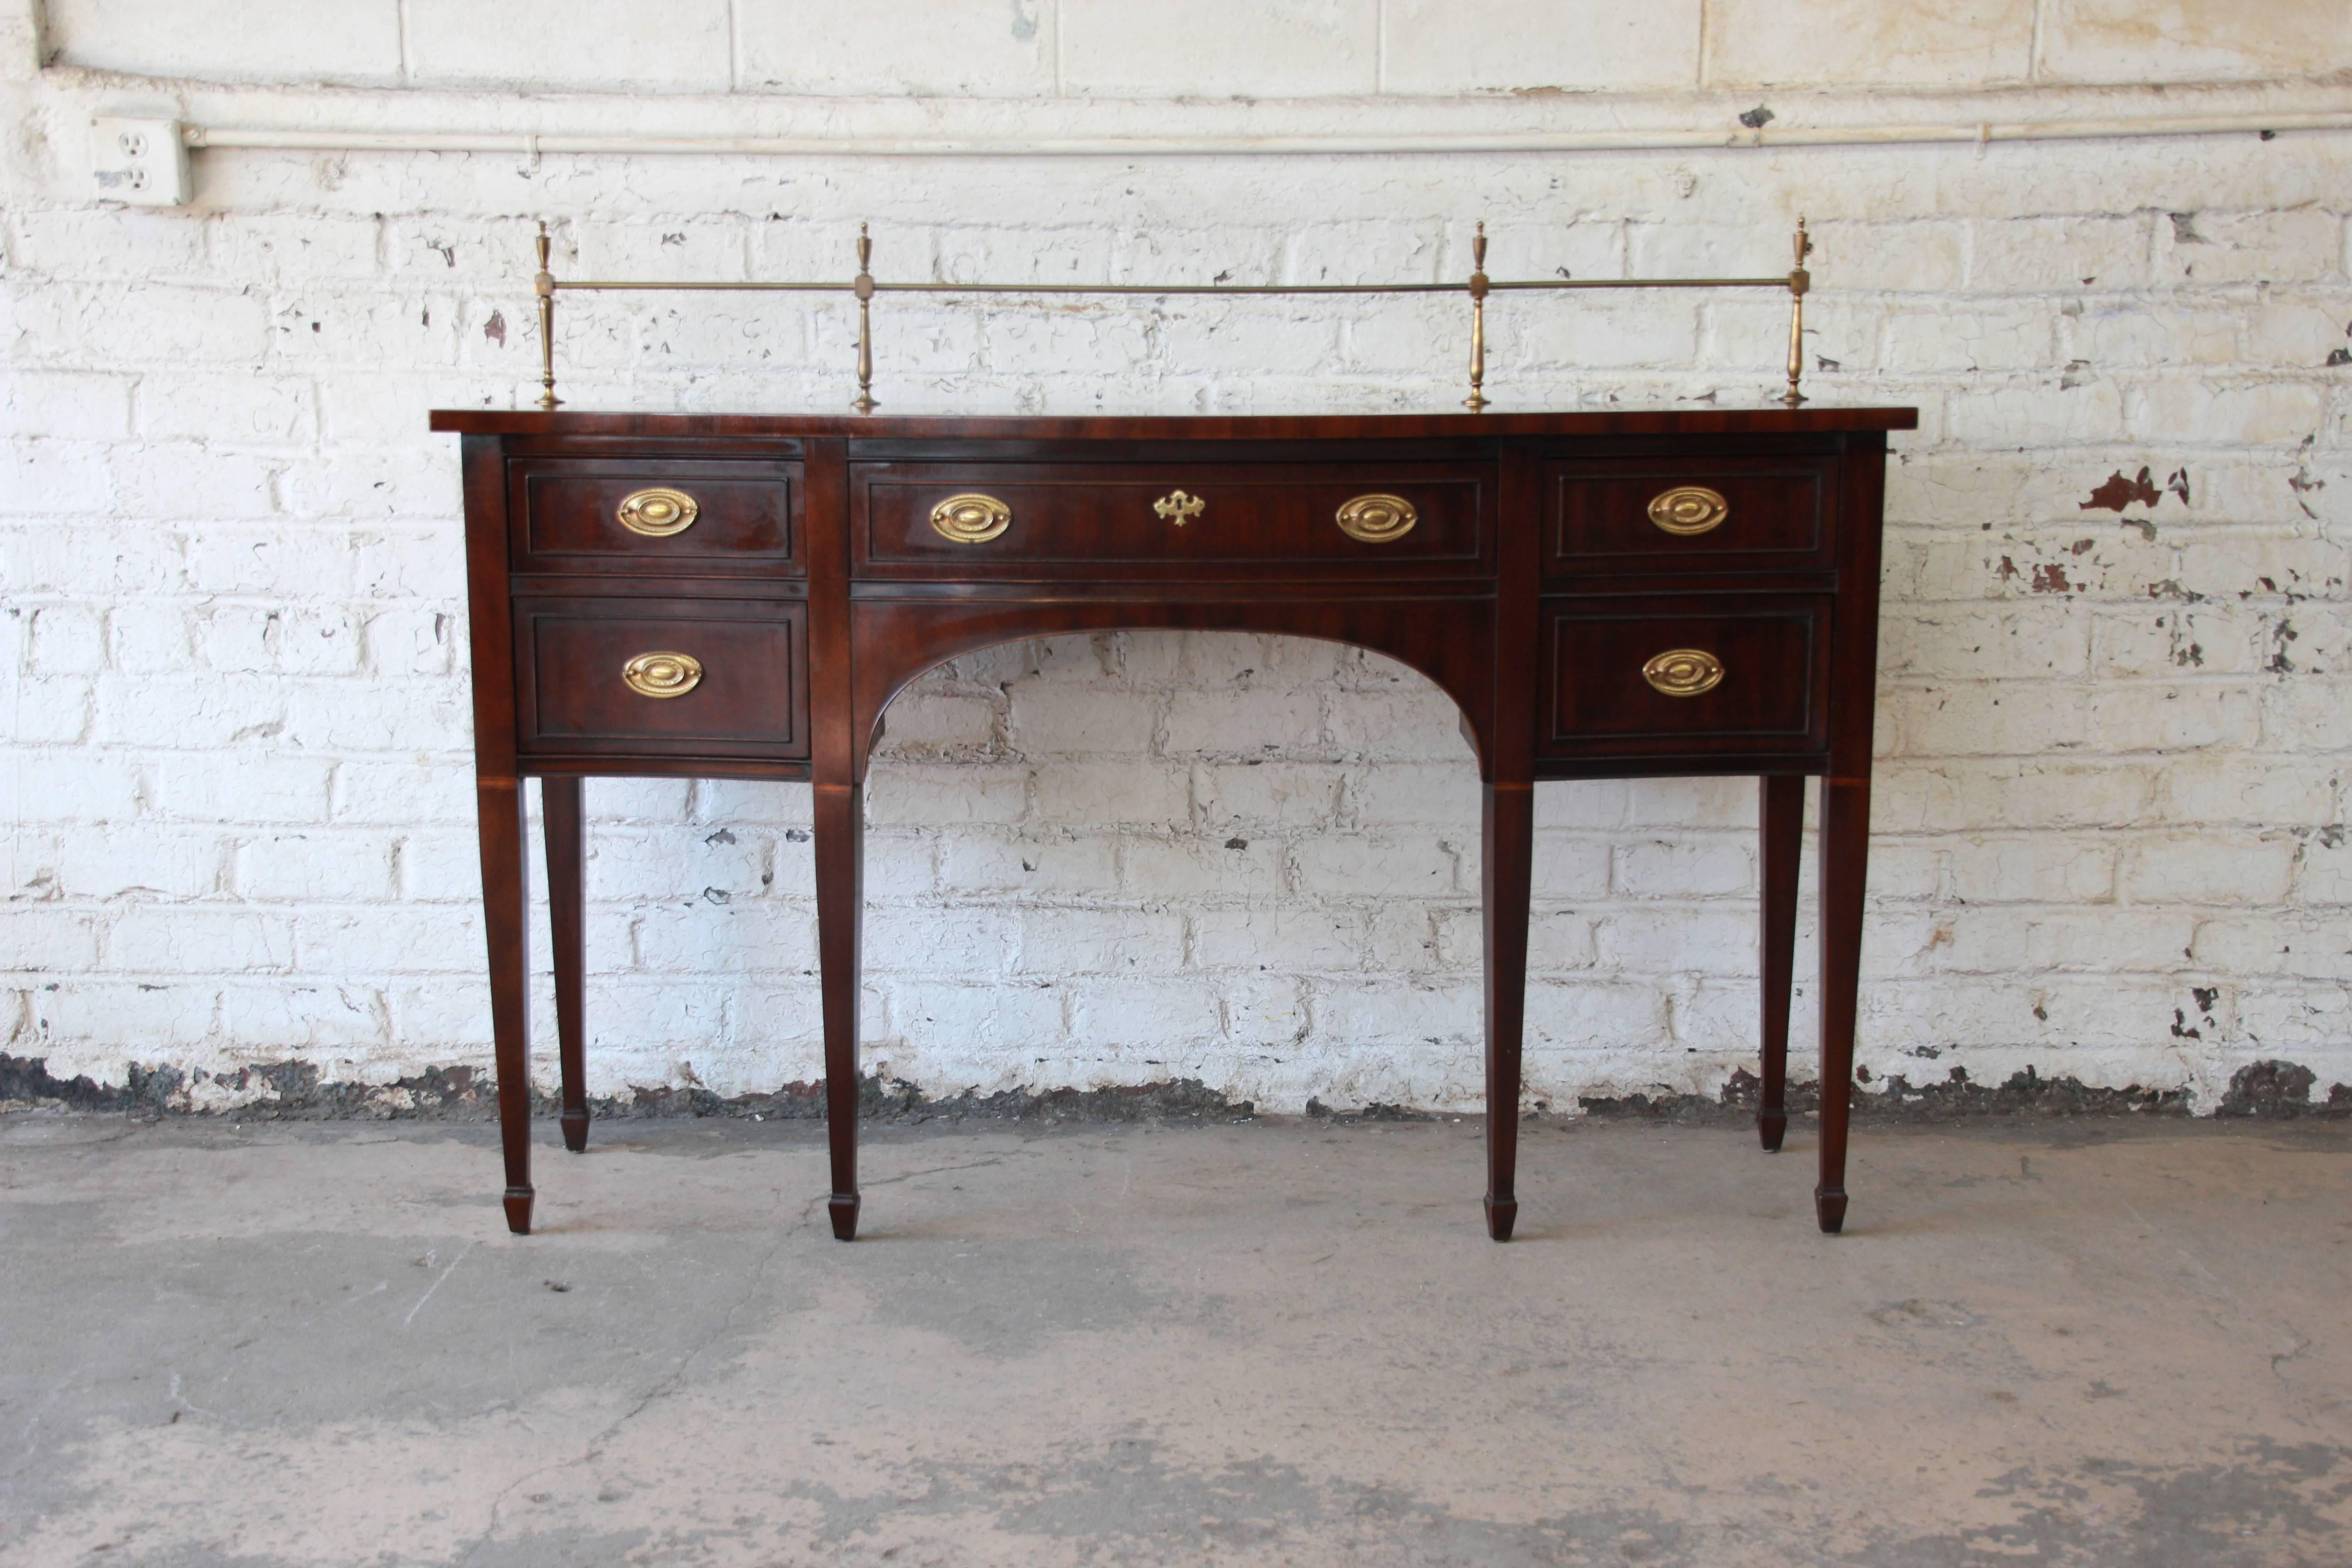 An exceptional Hepplewhite style sideboard buffet from the 